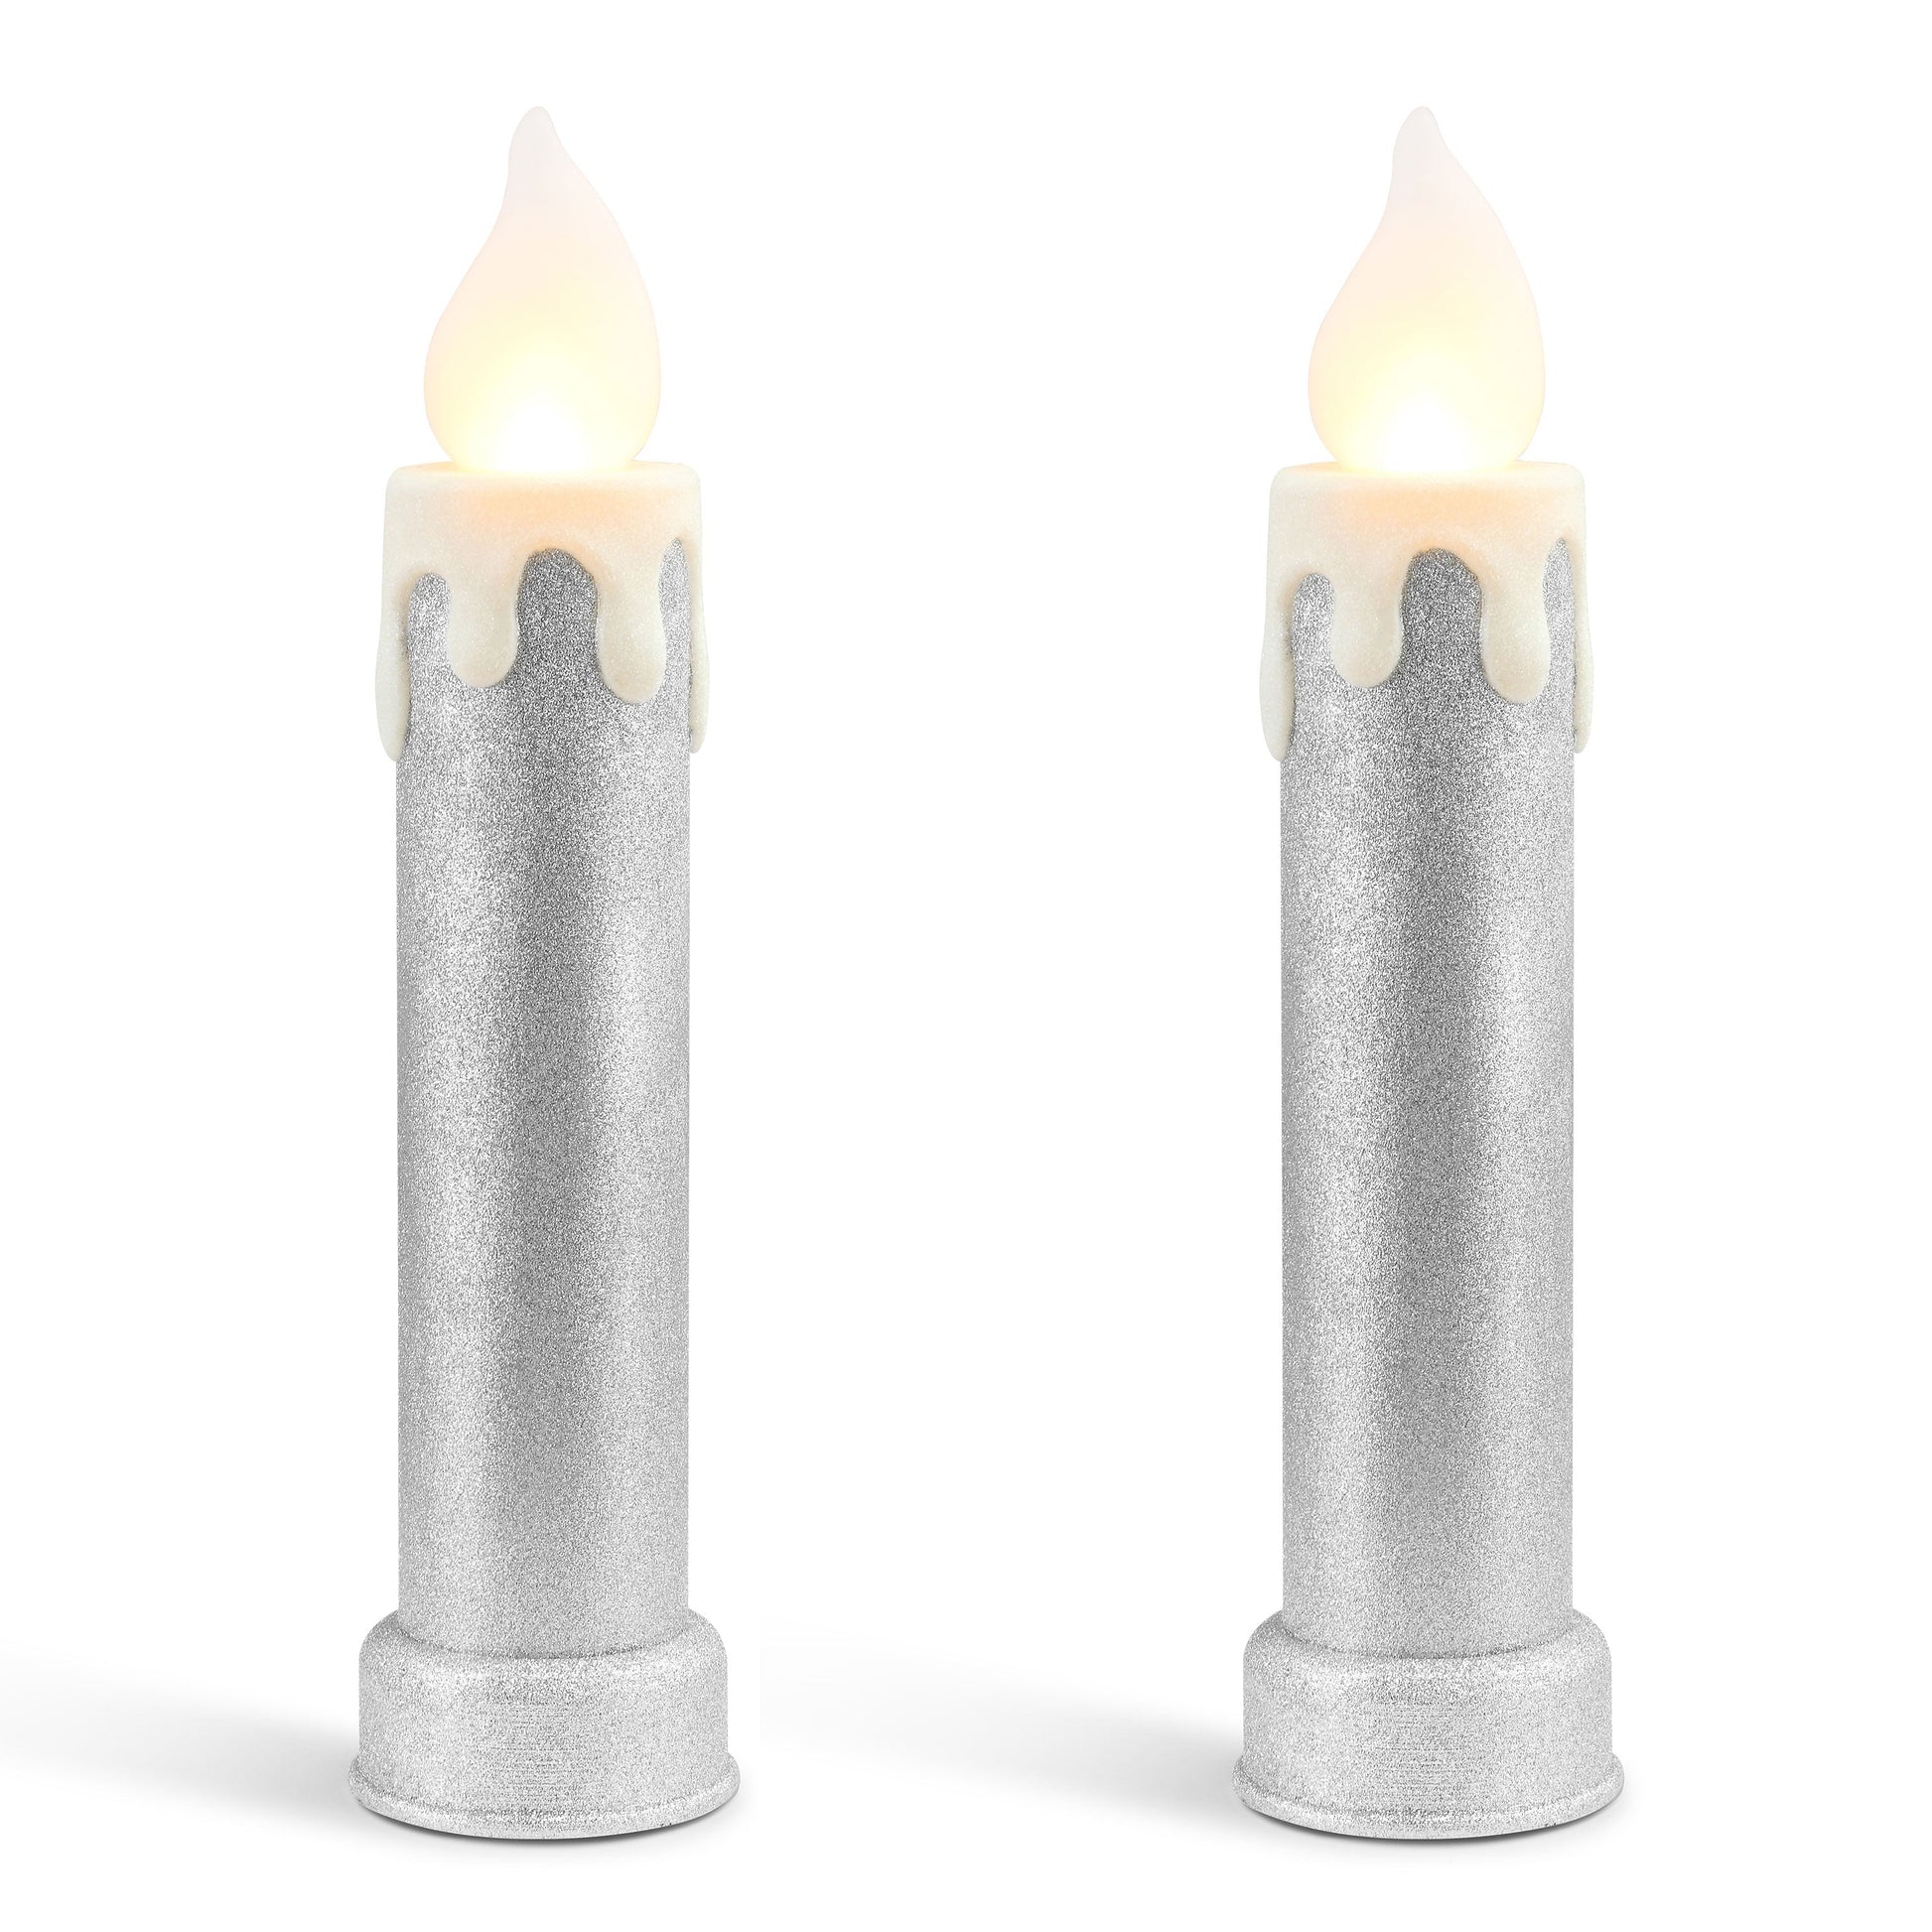 ARE YOU SUPPOSED TO COVER A CANDLE AFTER BLOWING IT OUT?